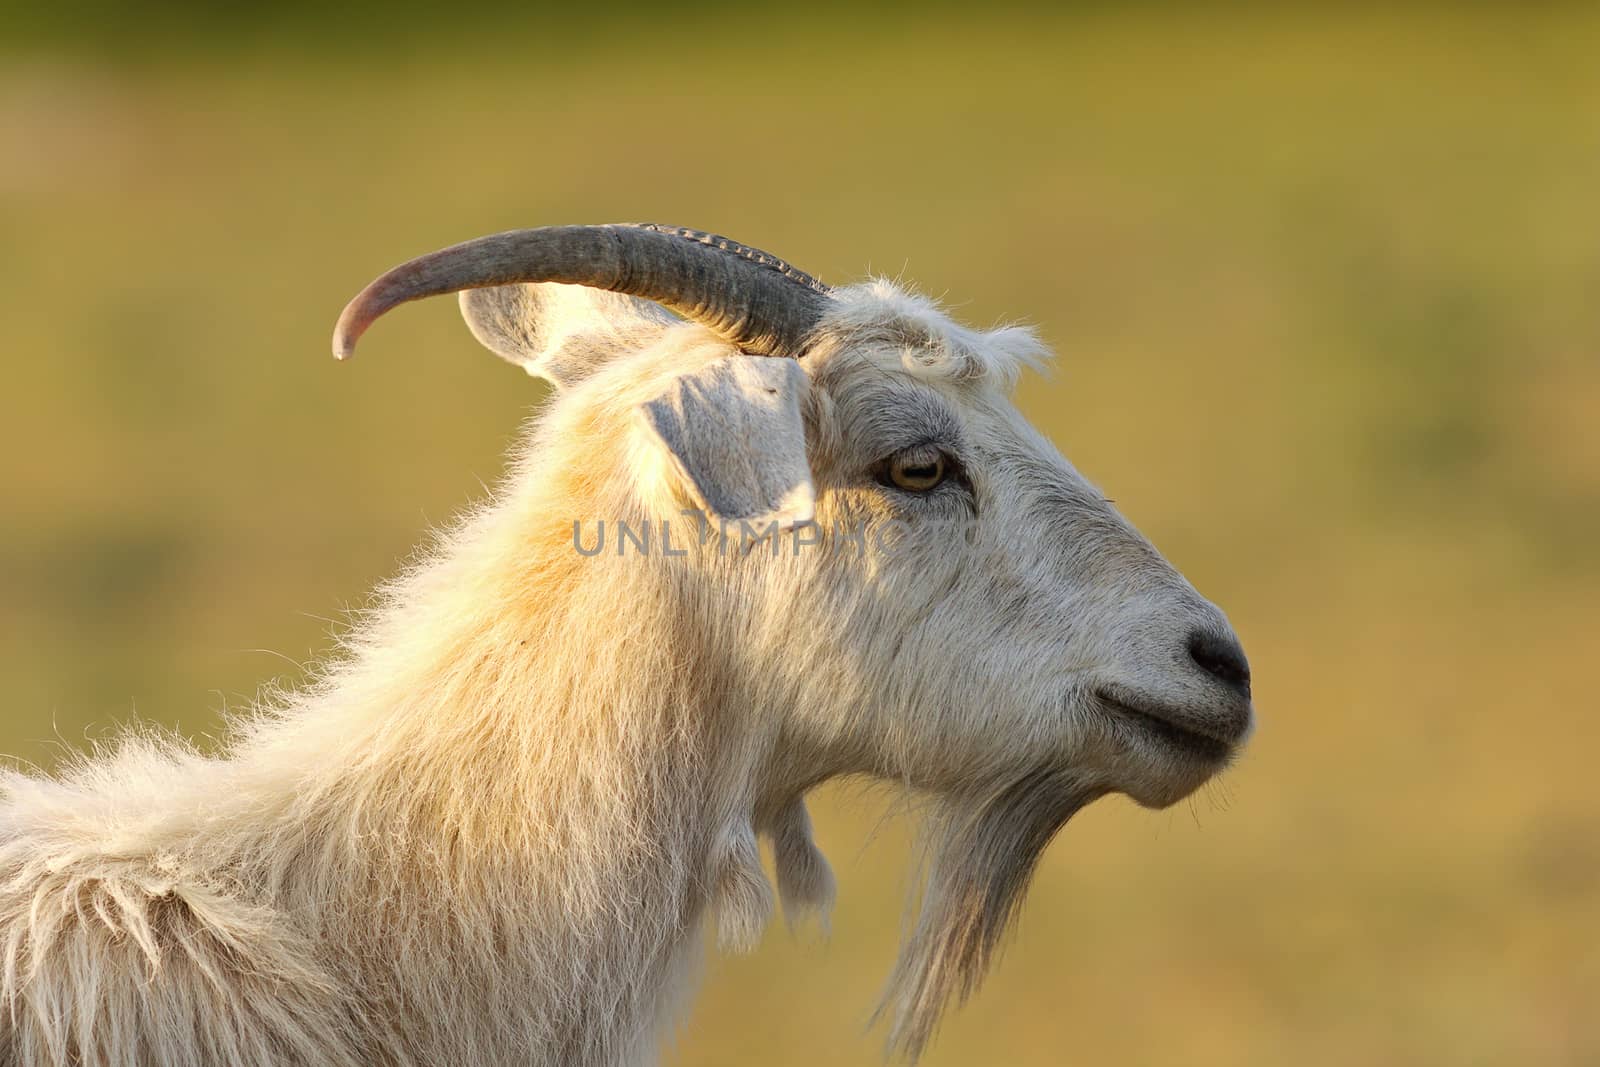 bearded white goat by taviphoto